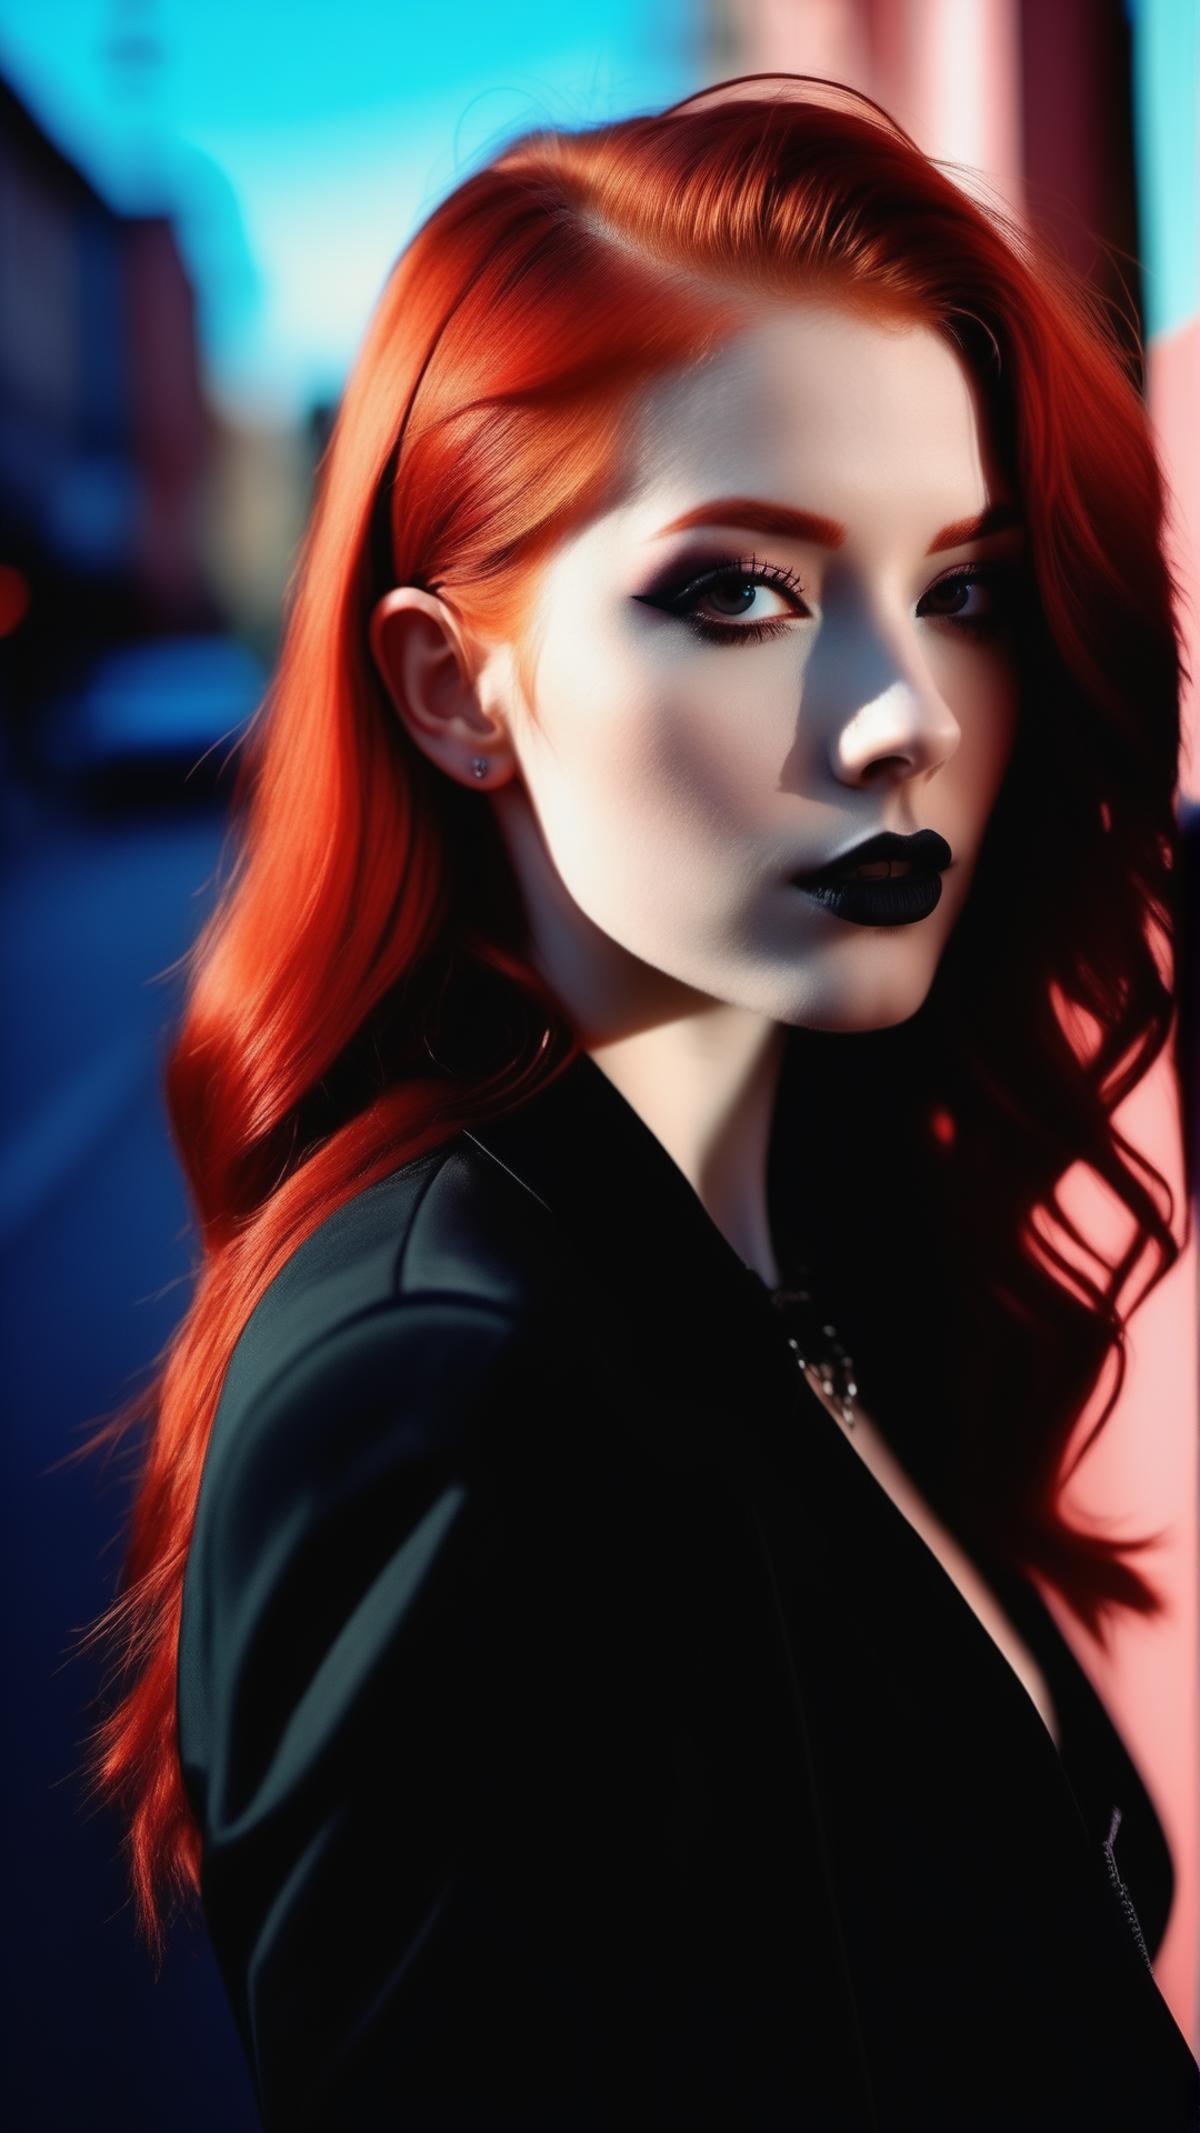 A red-haired woman with painted lips and eyes, wearing a black jacket and black lipstick.